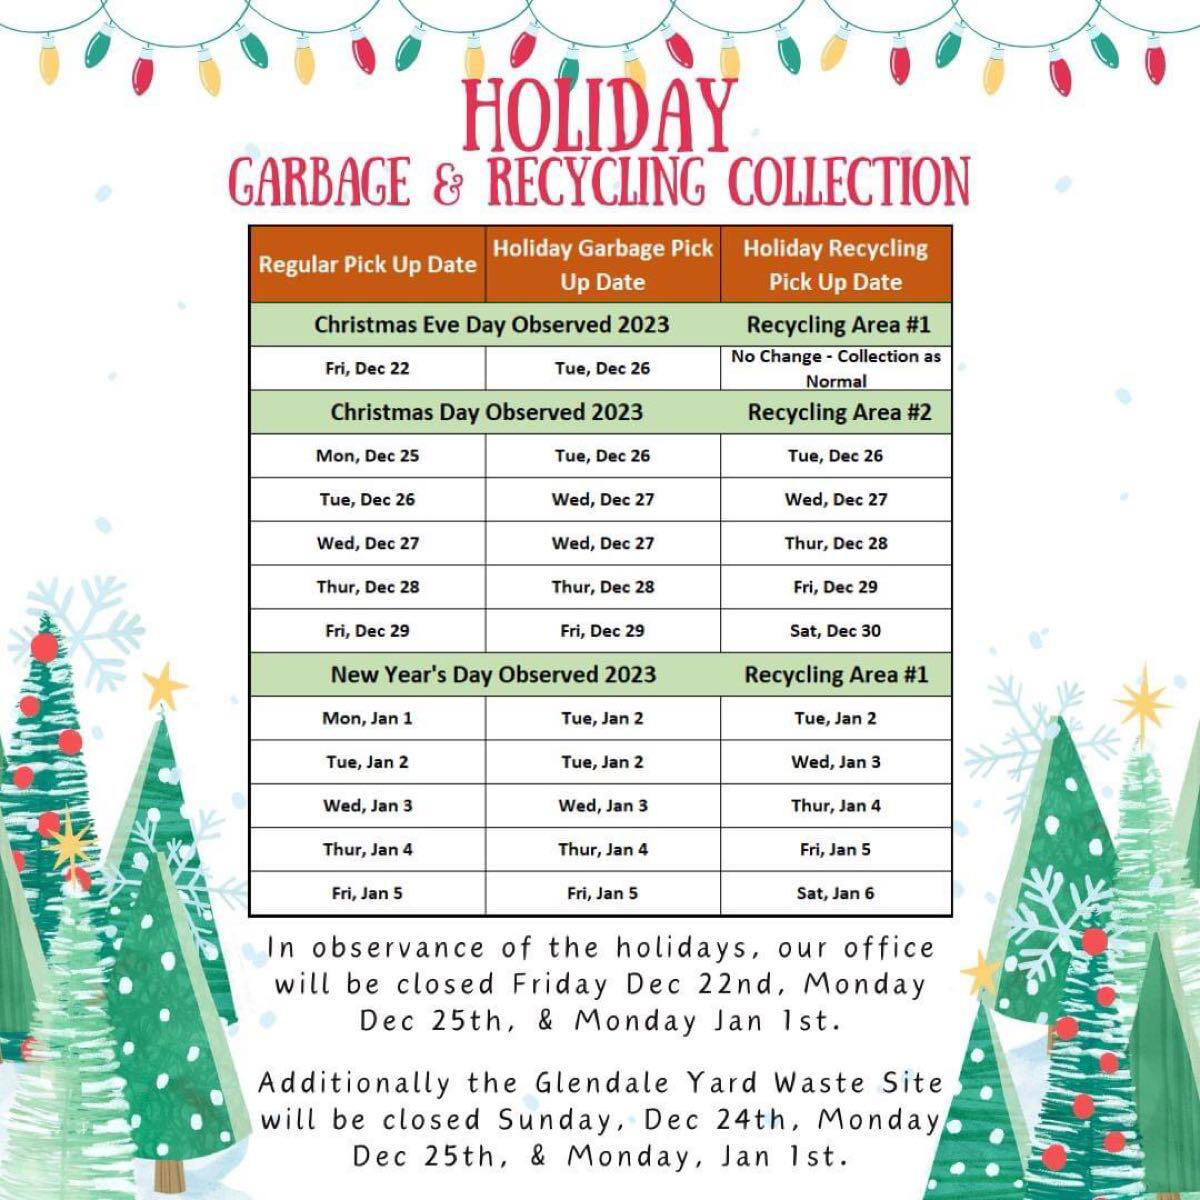 Appleton Holiday Garbage and Recycling Schedule East Appleton River Fork